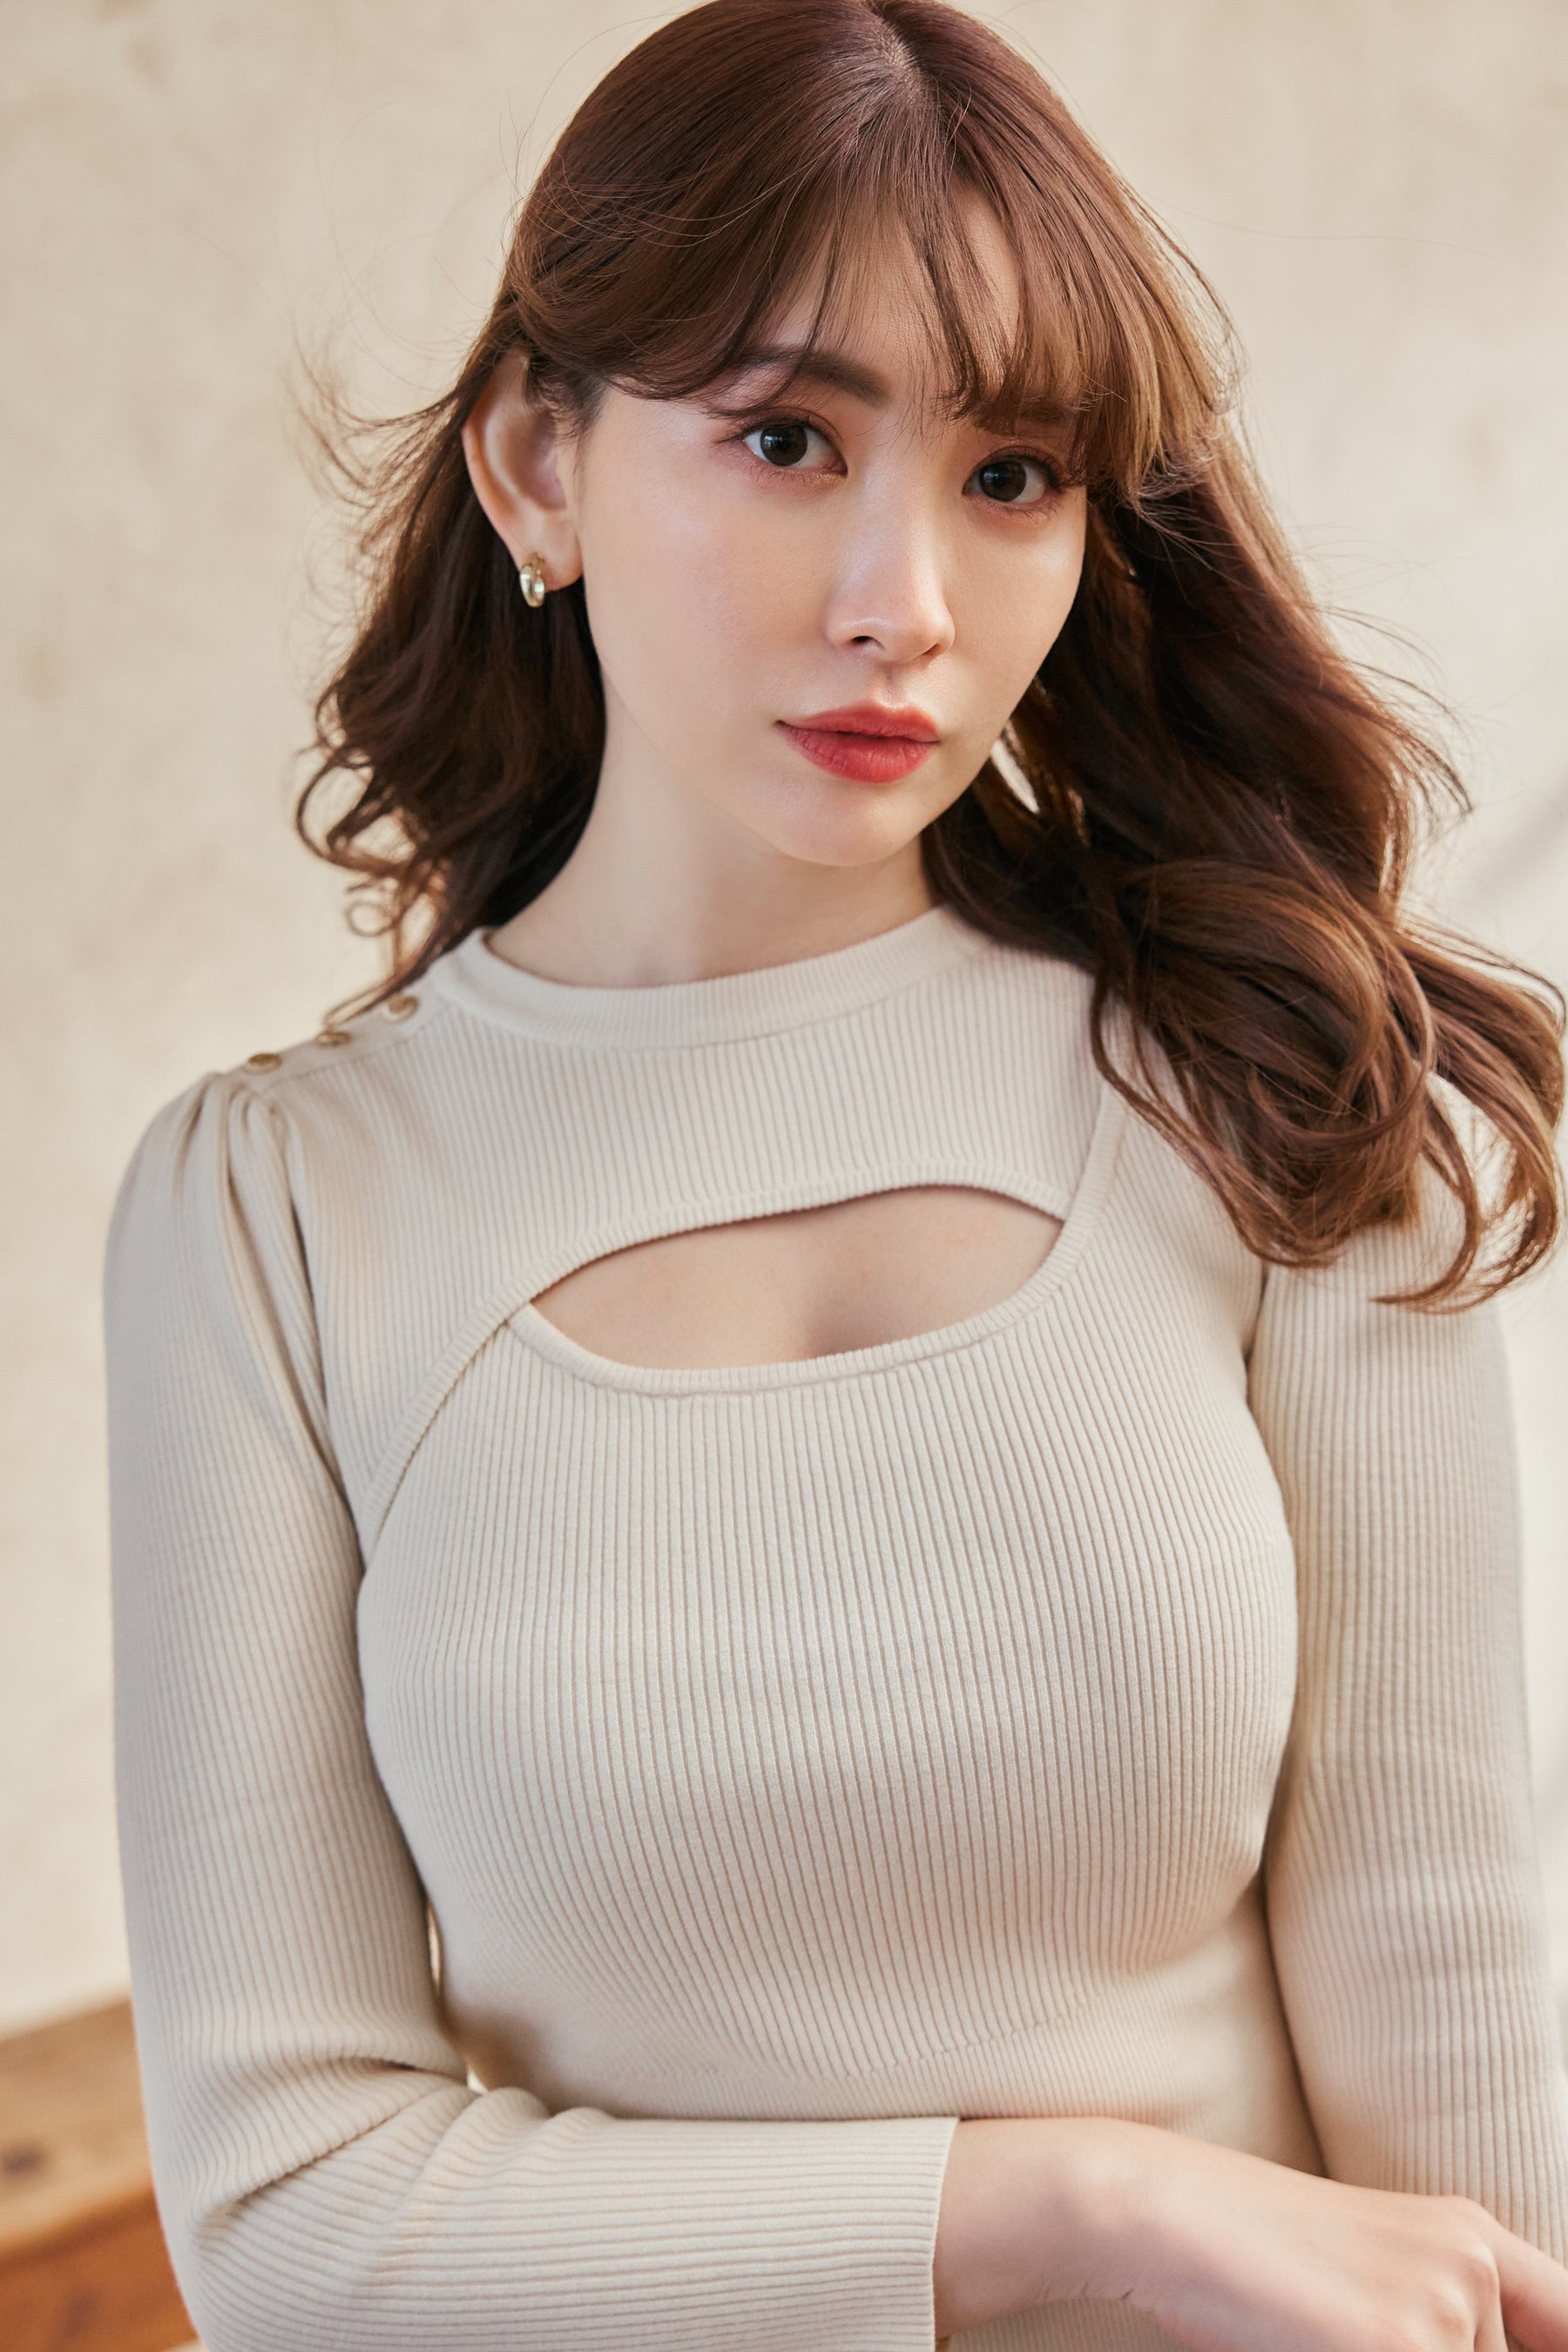 Cut-Out Ribbed Long Sleeve Knit Top